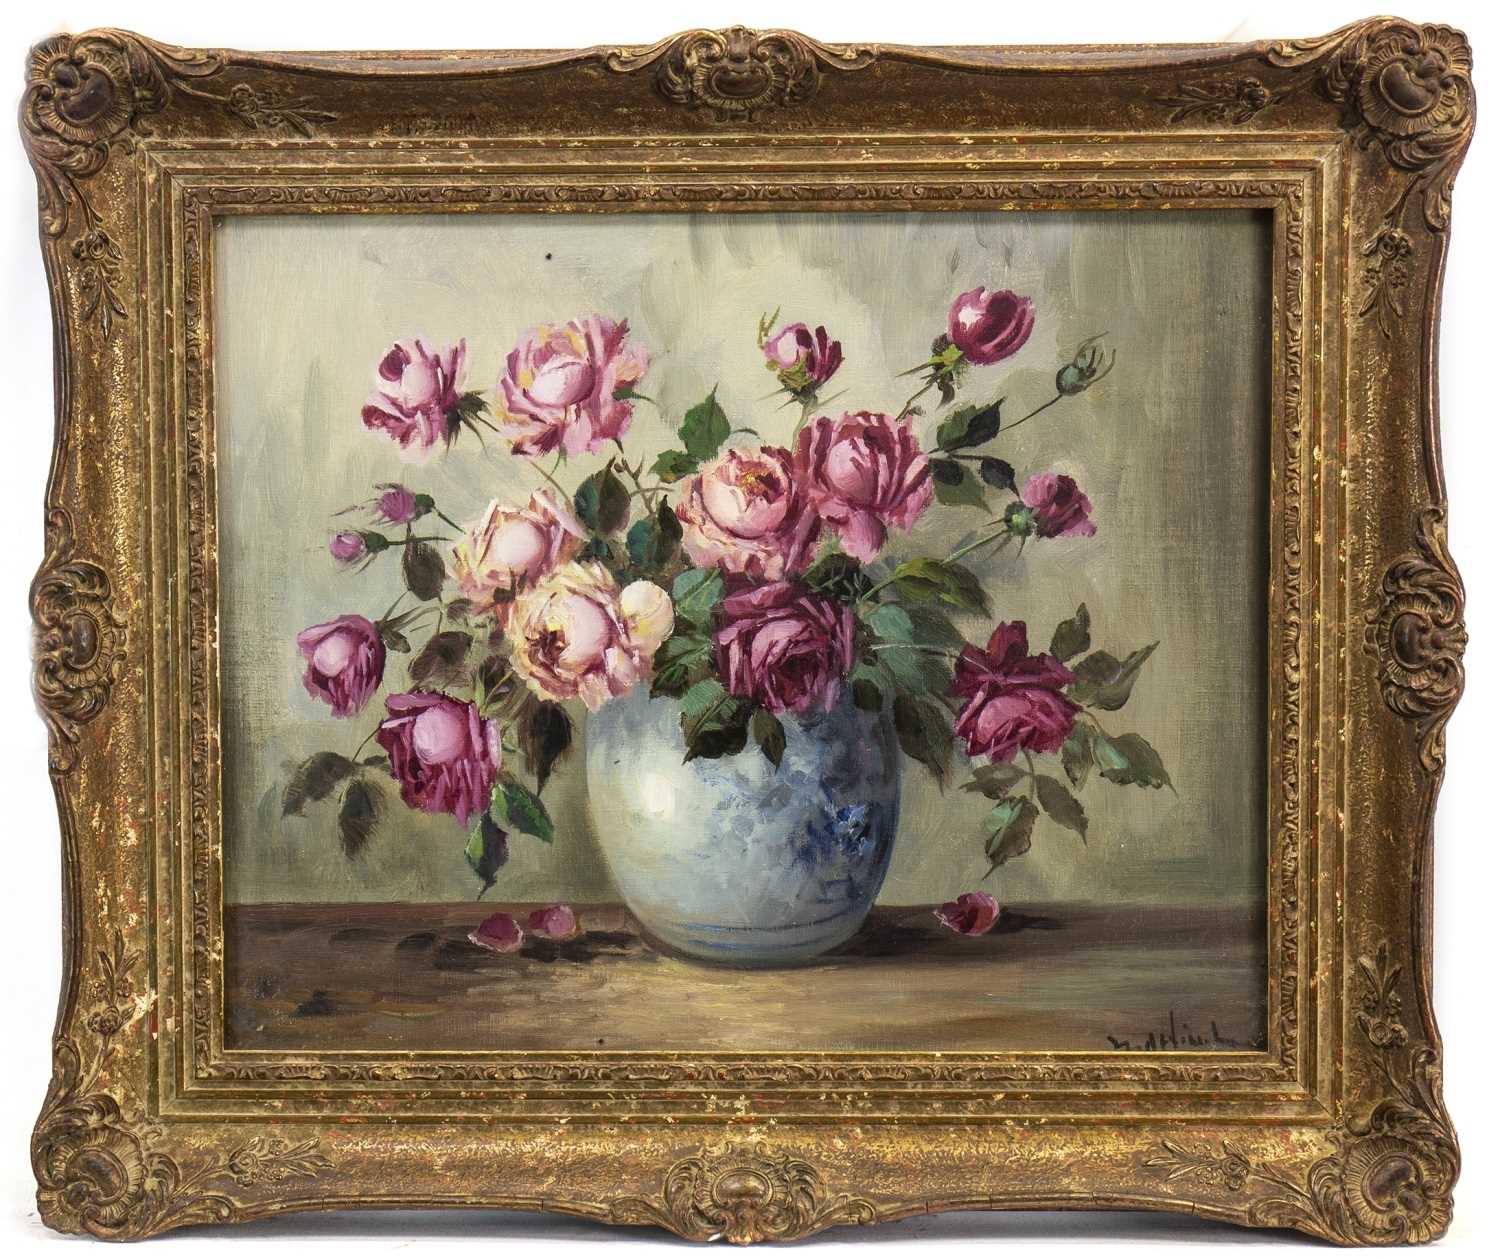 Lot 641 - FLORAL STILL LIFE, IN THE STYLE OF ALFRED LEHMANN